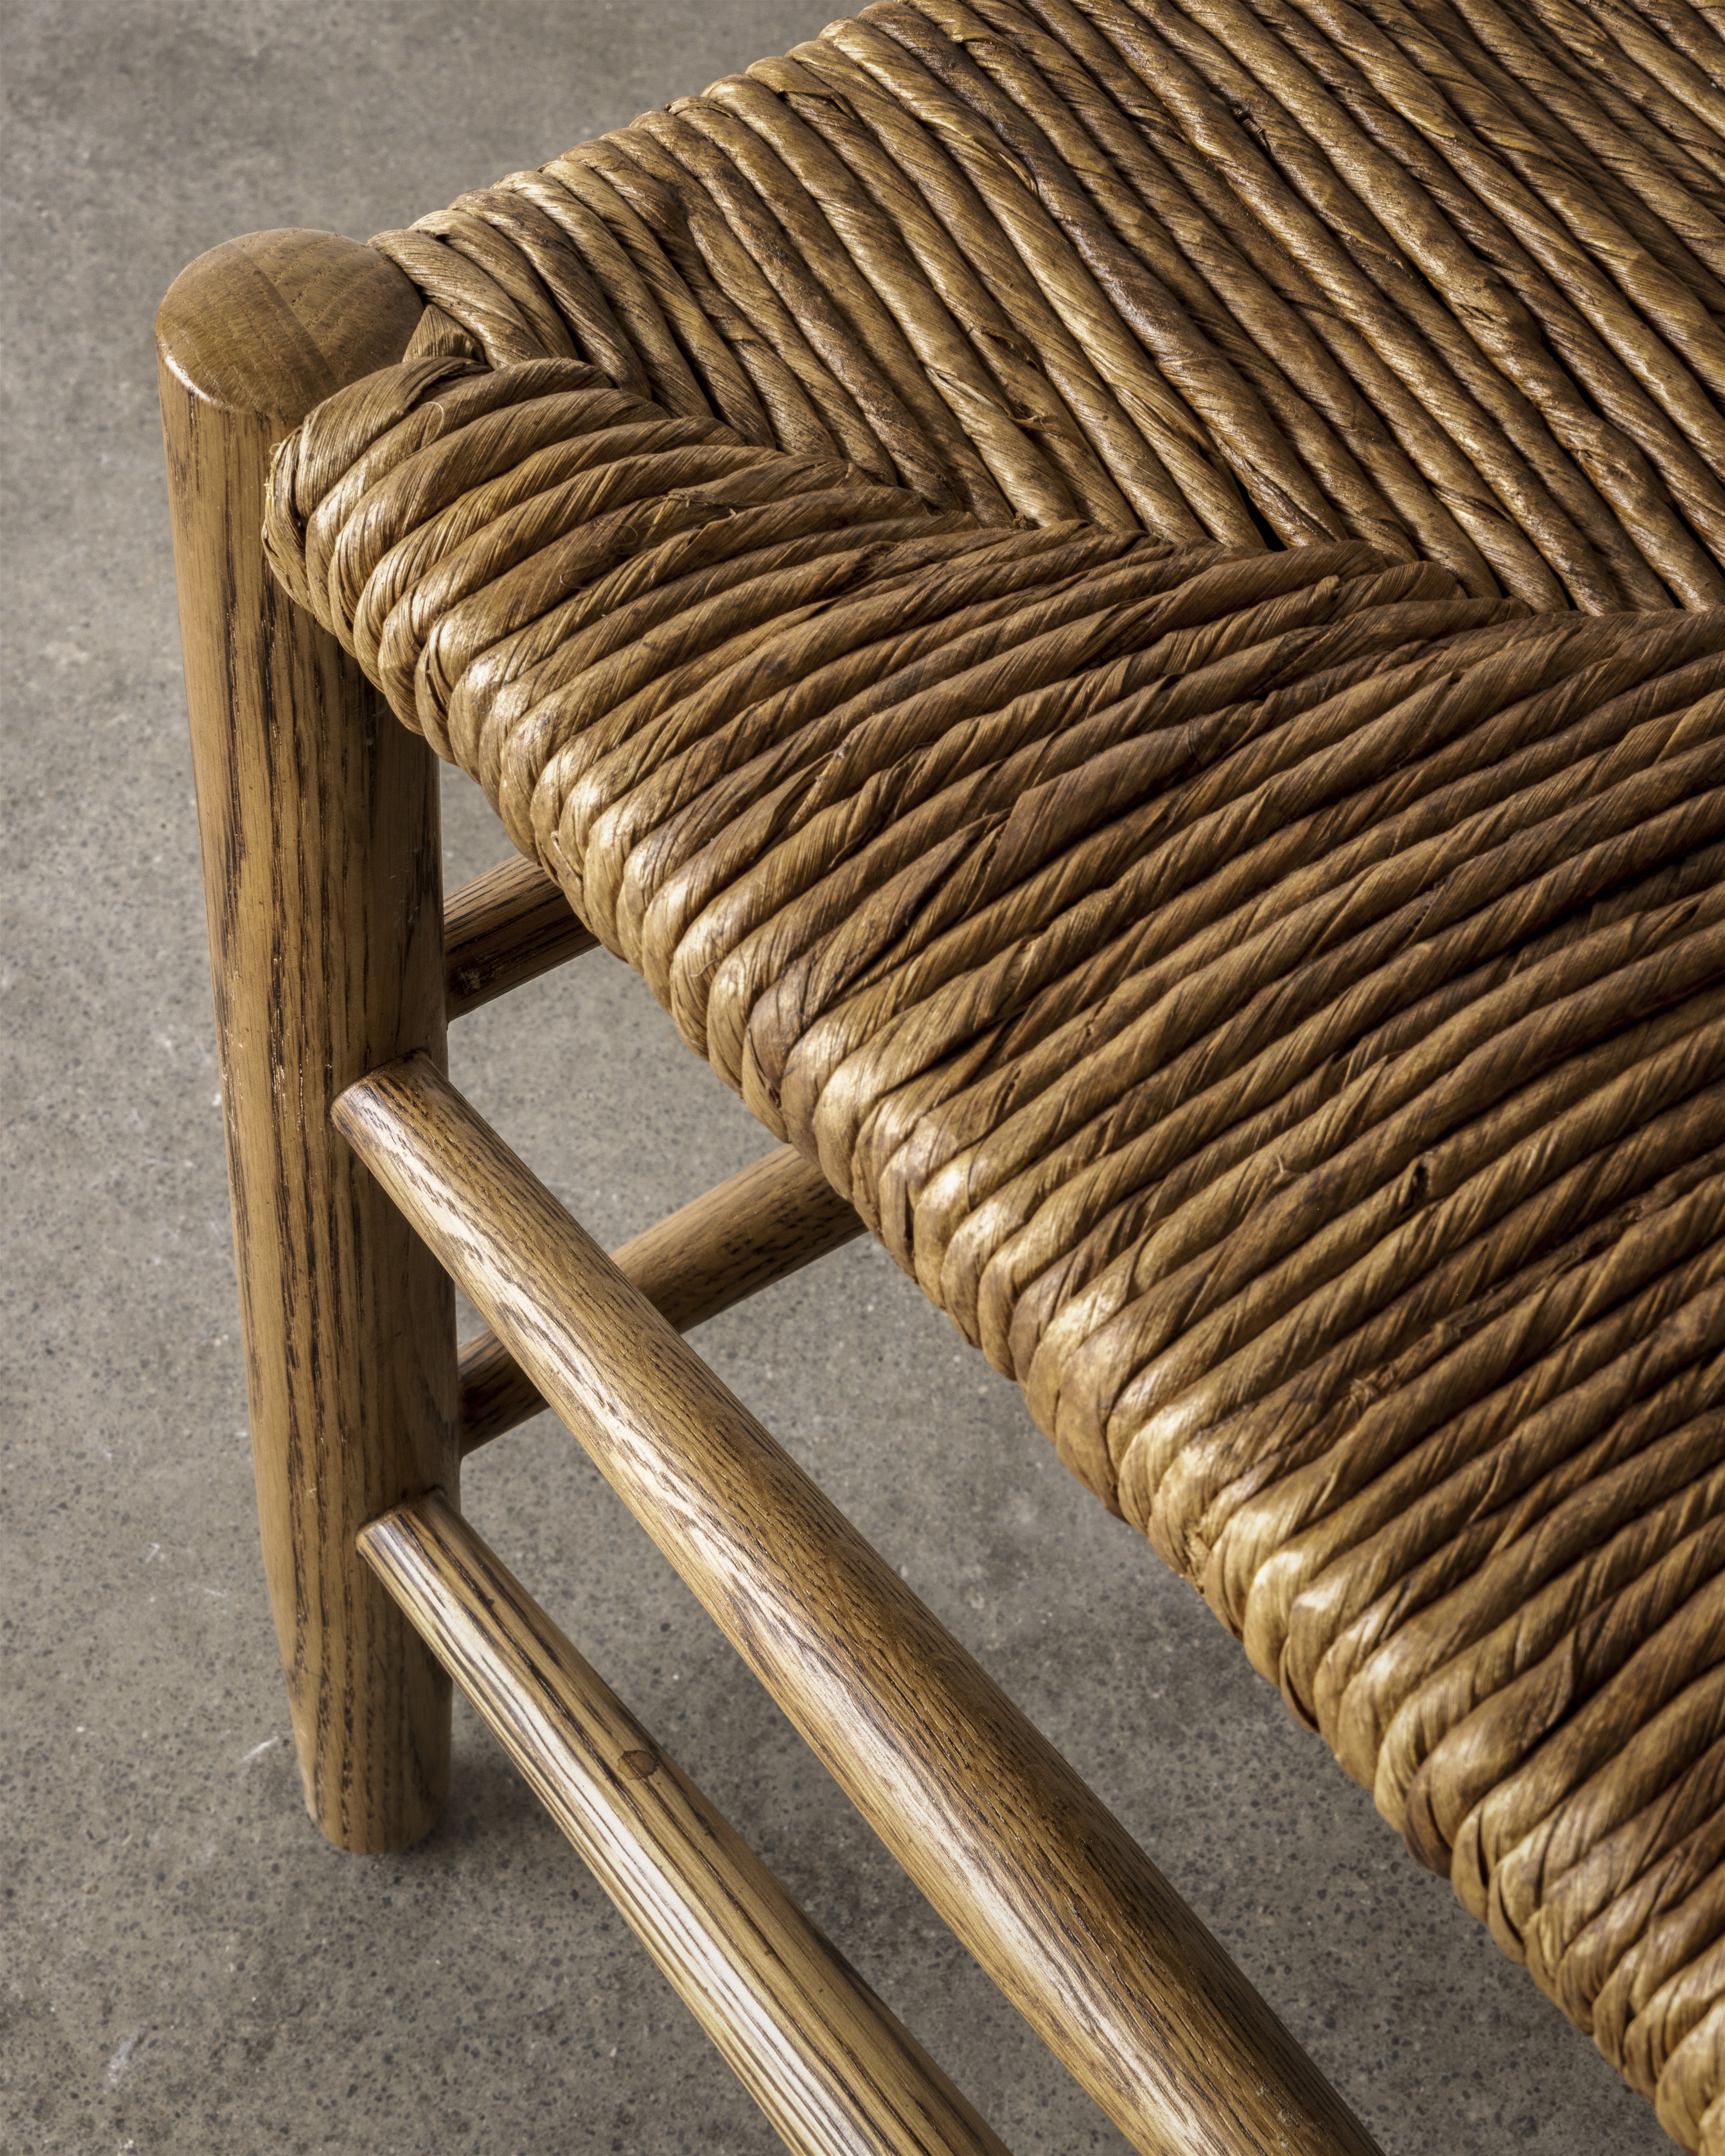 a close up of a wooden bench made of wicker